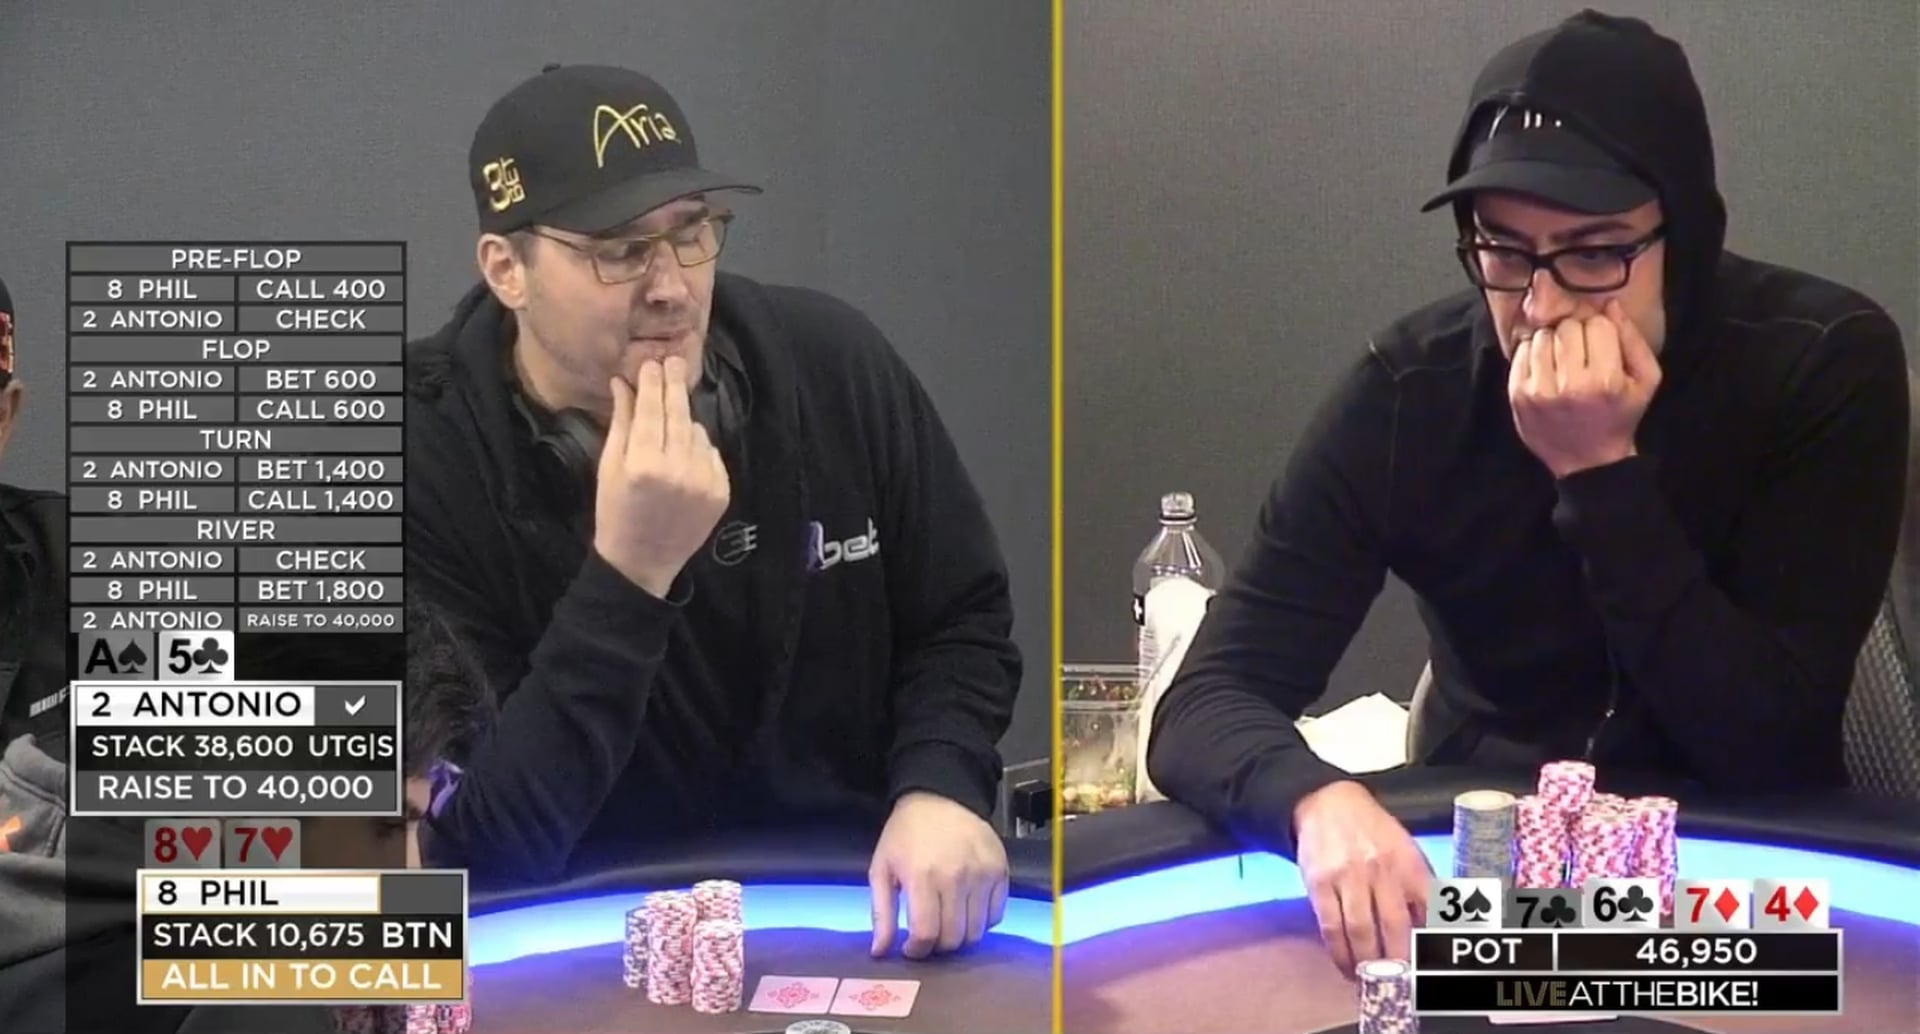 Phil Hellmuth and Antonio Esfandiari to Play Heads-Up Poker and Loser Gets Tasered?